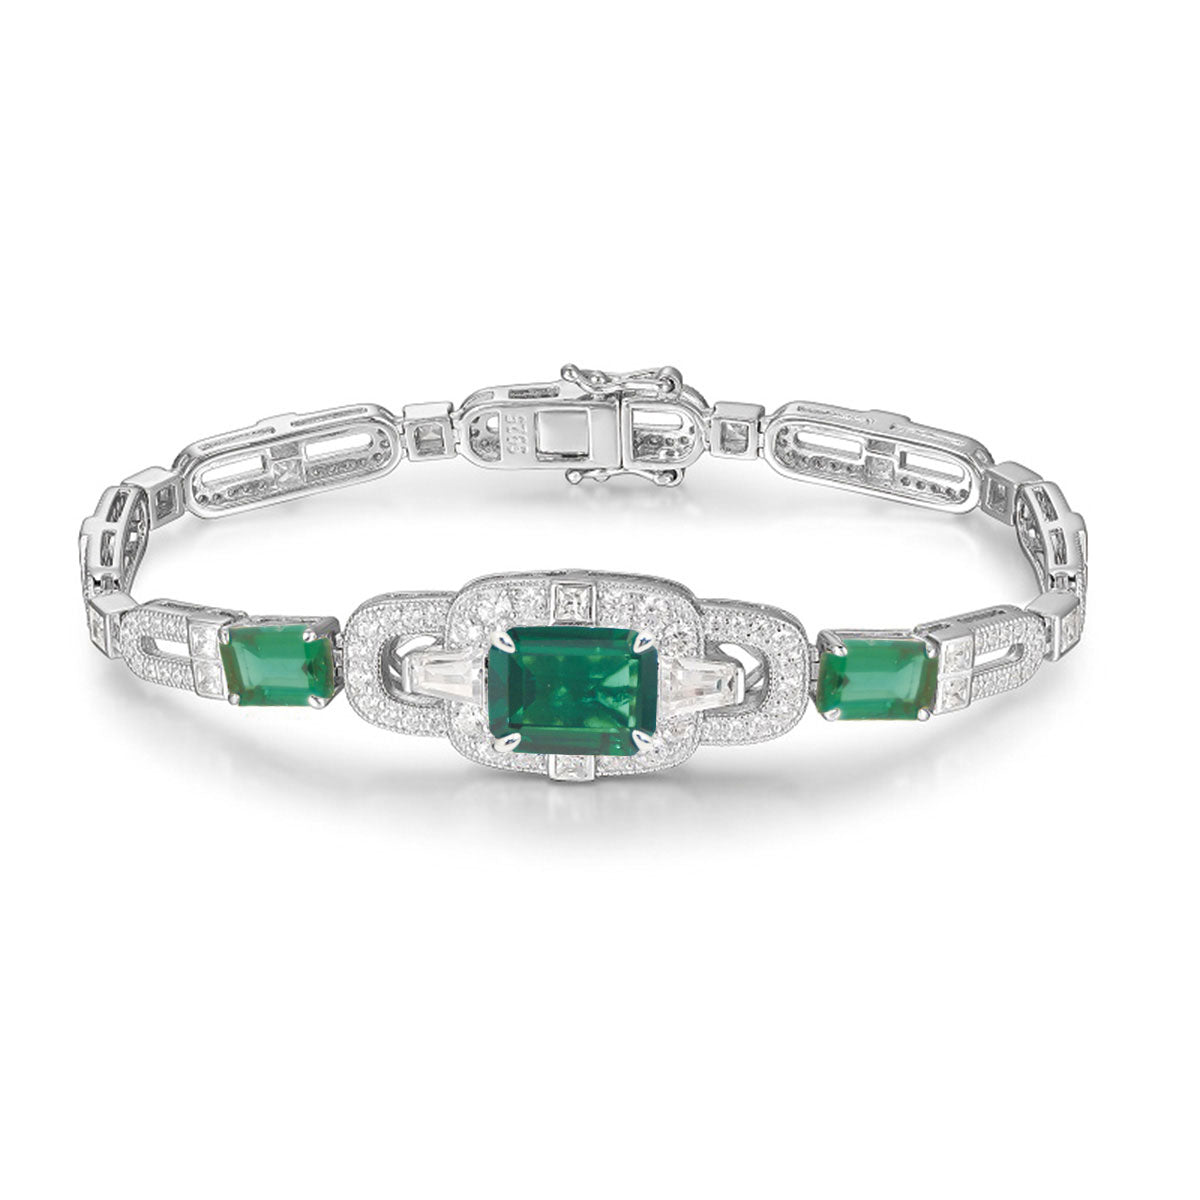 Sterling Silver Square Emerald Gem with Channel Setting Stones Retro Bracelet